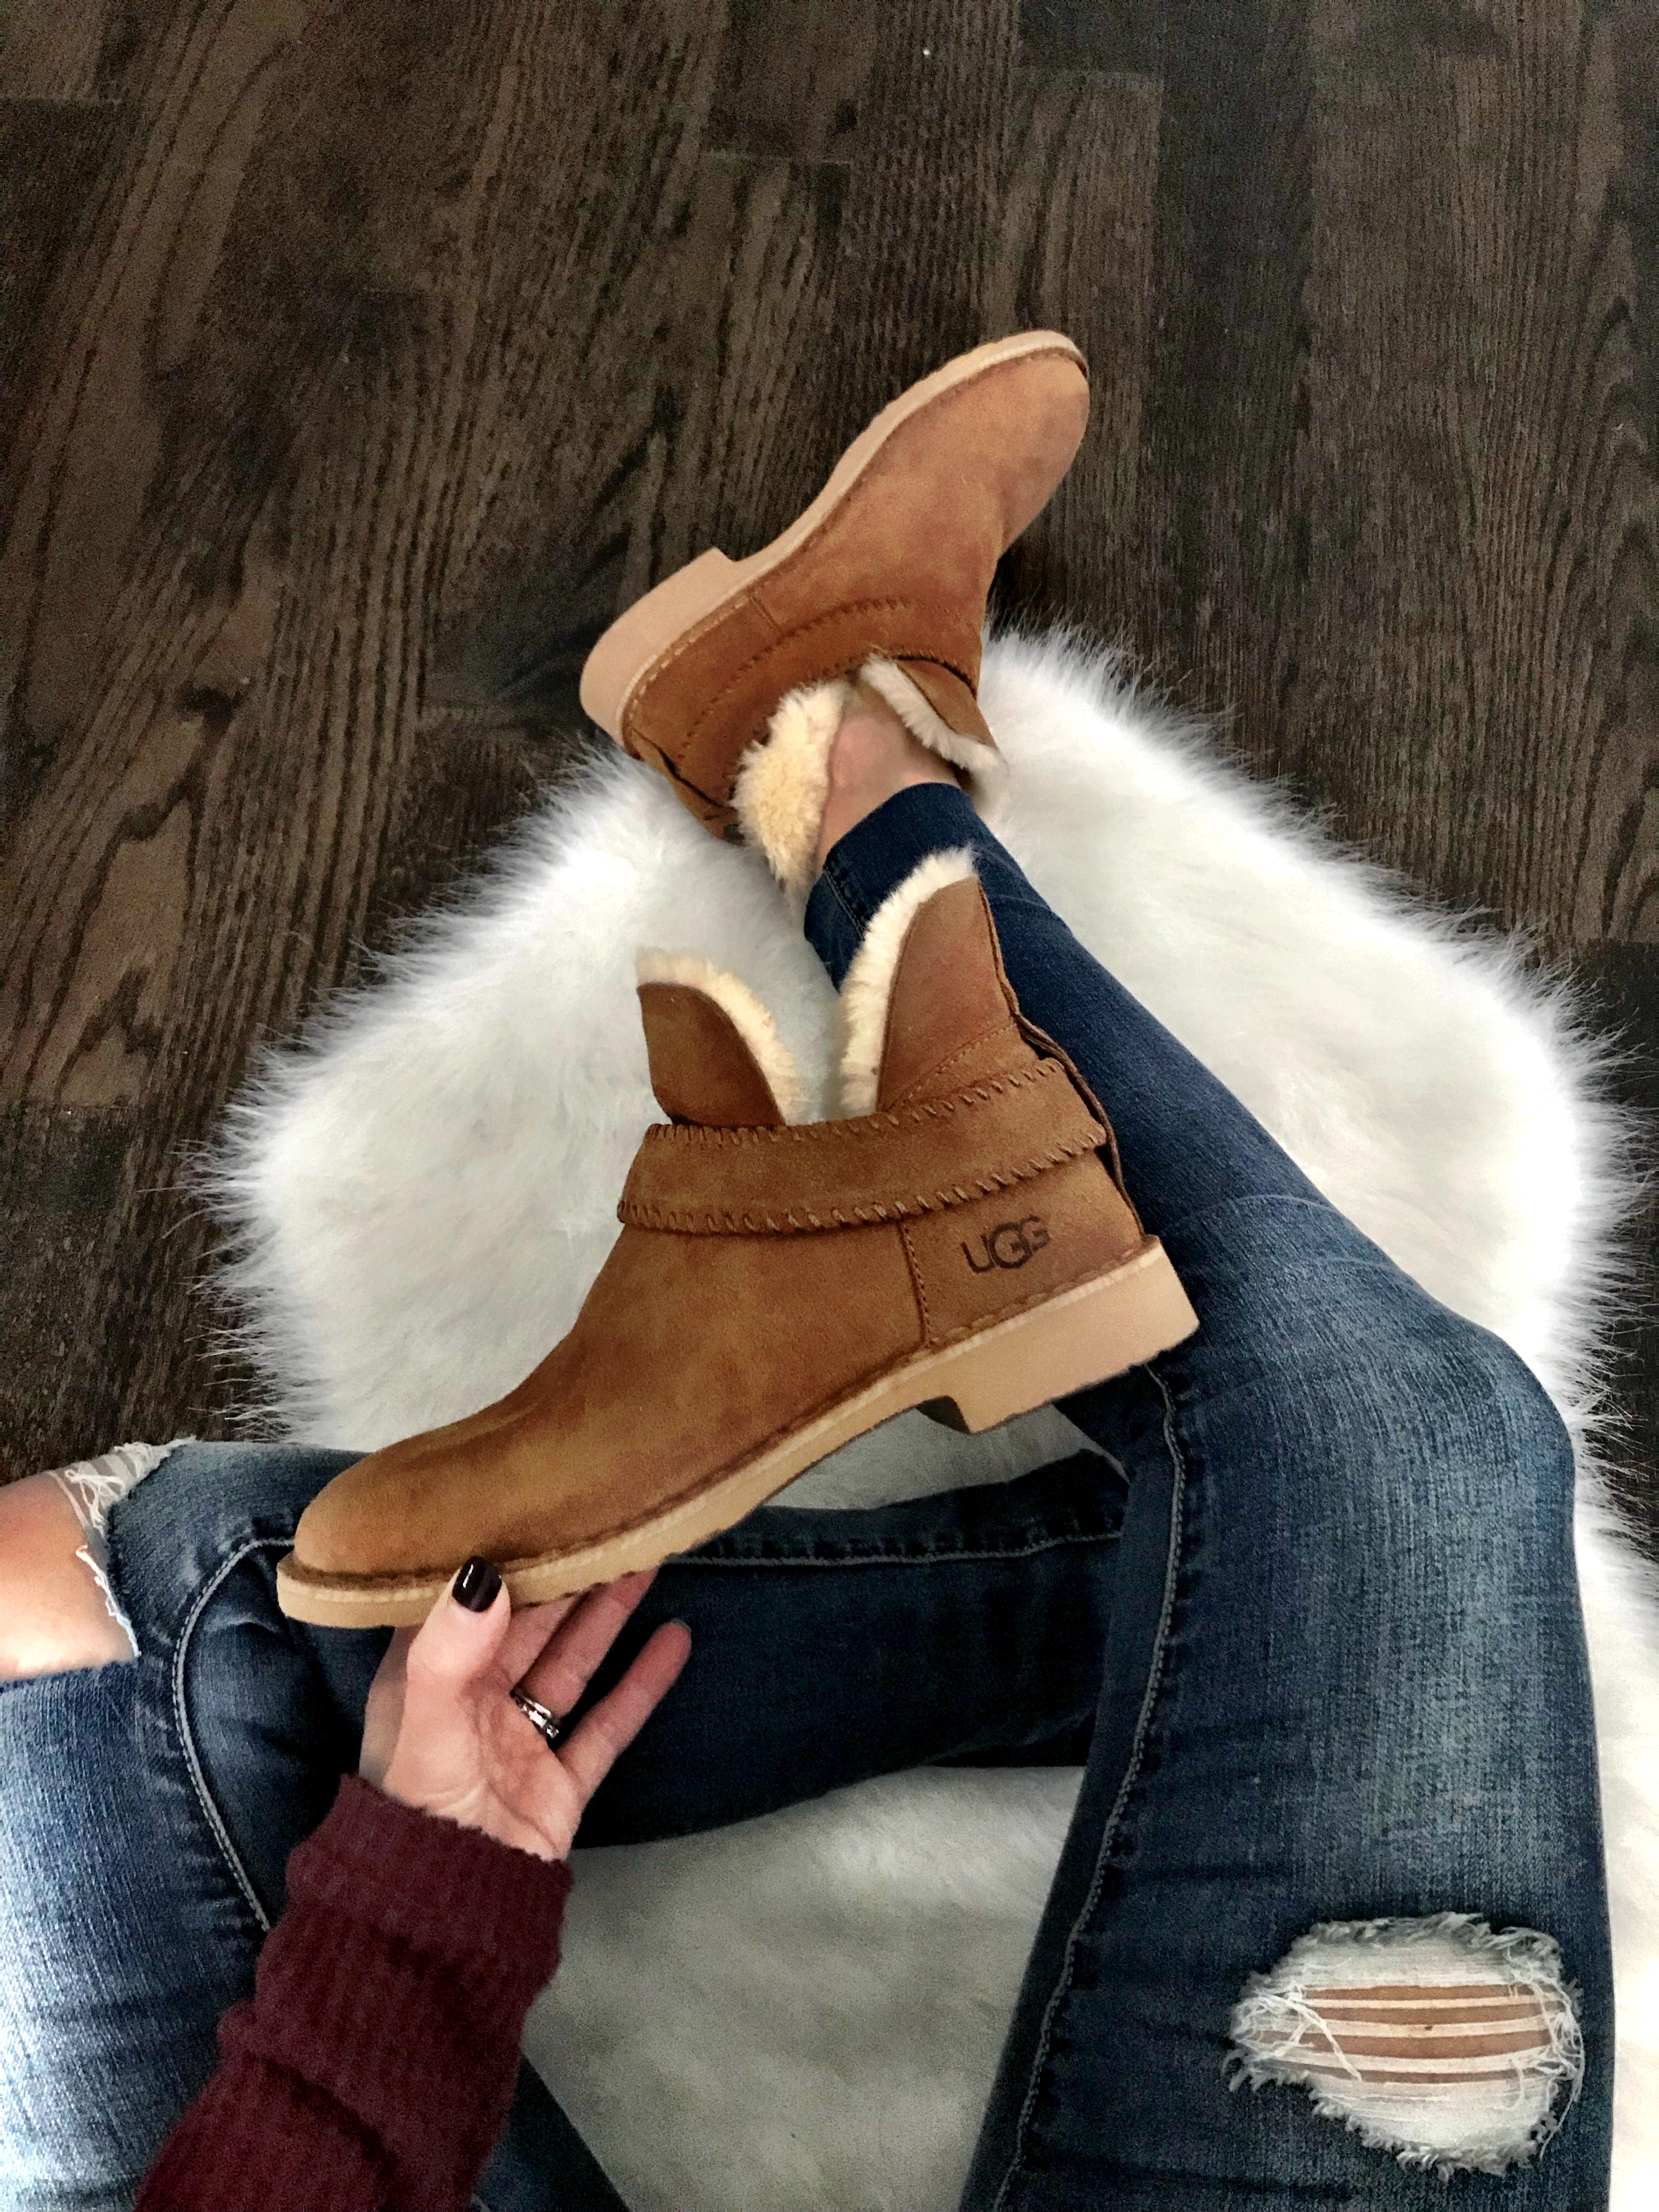 ugg mckay boot size 6 off 52% - www 